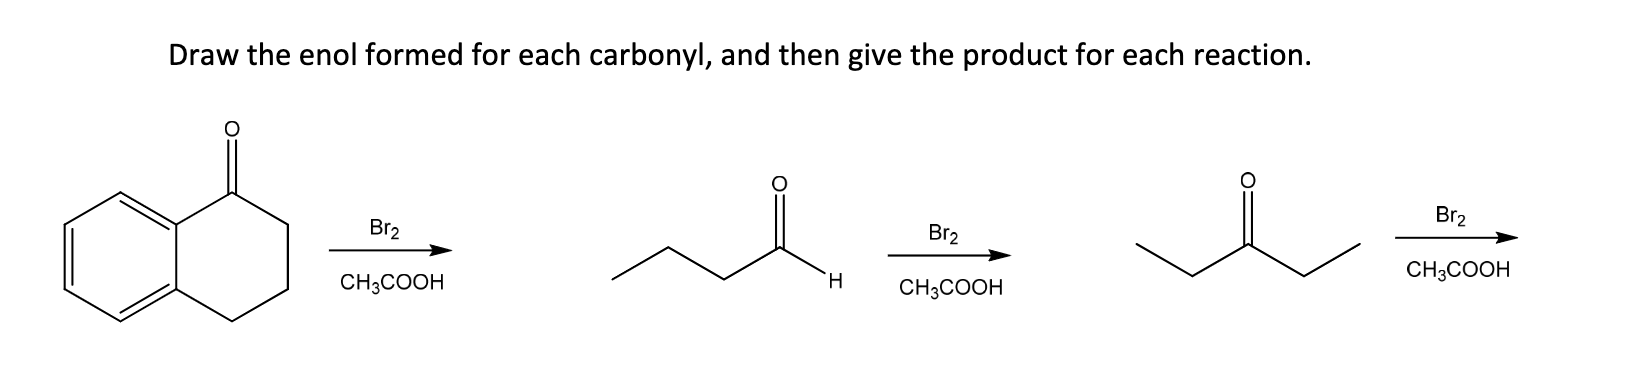 Draw the enol formed for each carbonyl, and then give the product for each reaction.
\( \underset{\mathrm{CH}_{3} \mathrm{COO